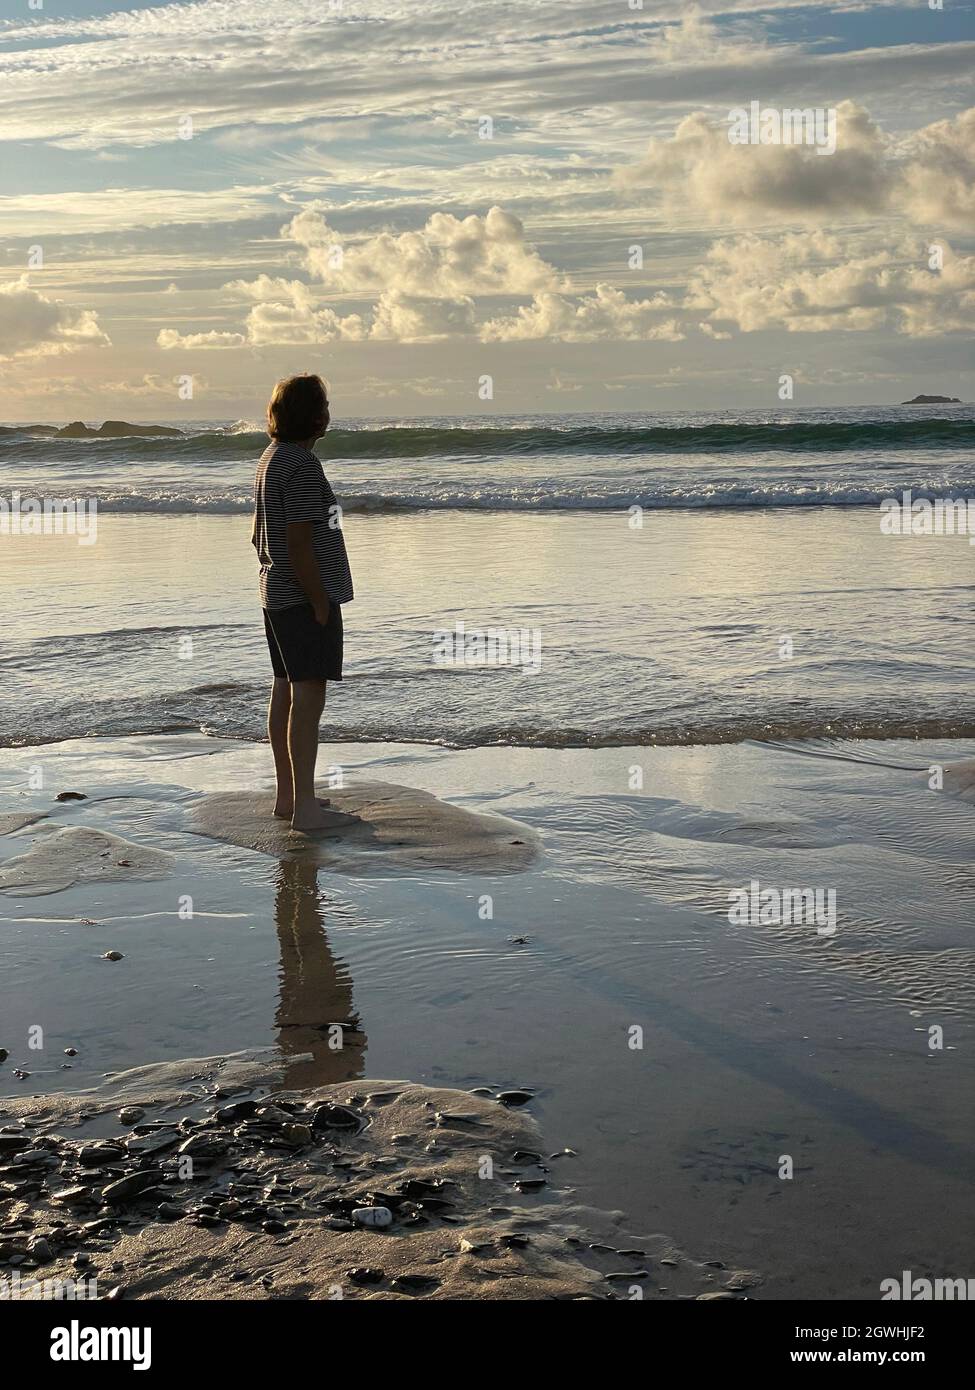 Full length back view of a mature man standing on the beach late afternoon as the sun sets. Looking towards the horizon wearing shorts and t-shirt. Stock Photo